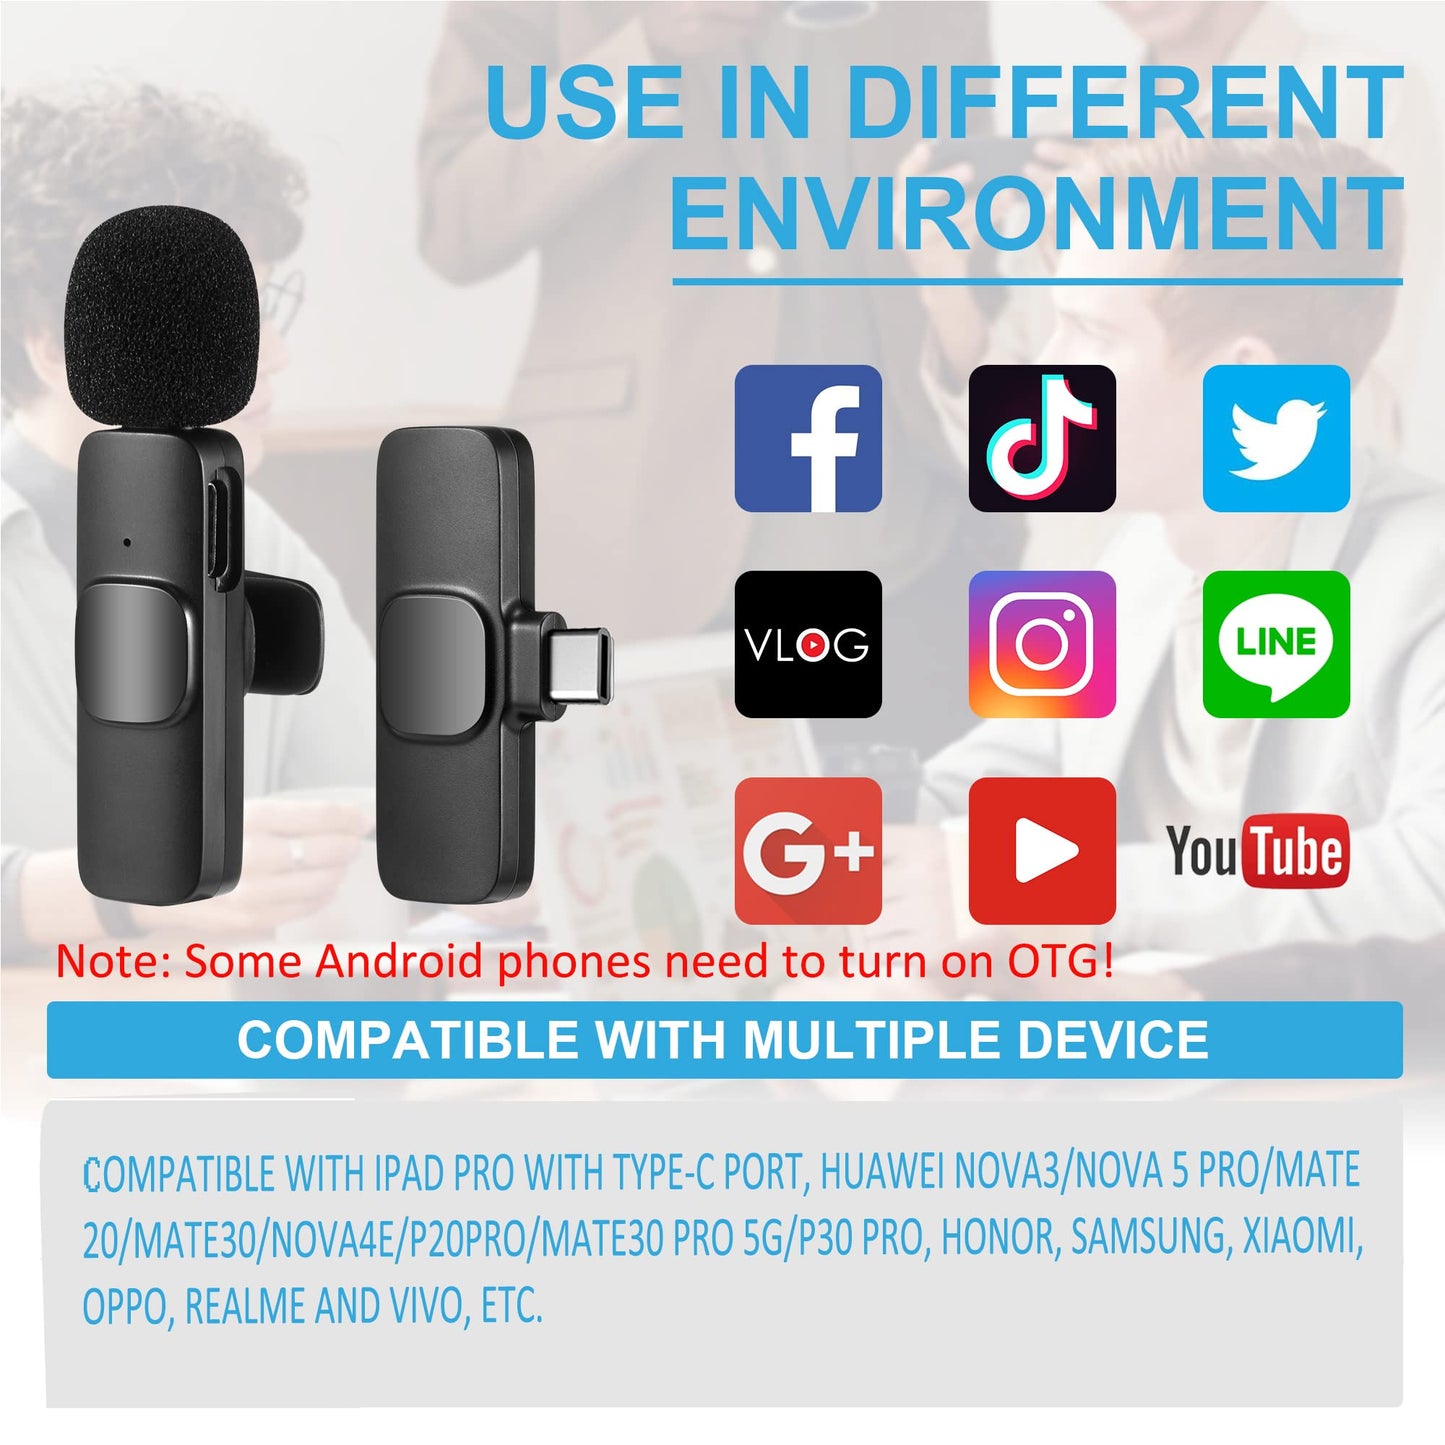 Wireless Lavalier Microphone for Phone(USB-C), Dual Wireless Microphone for Video Recording, Live Stream, Vlog, YouTube, TikTok, Facebook, Zoom - Noise Reduction & Plug-Play(No Need App/Bluetooth)